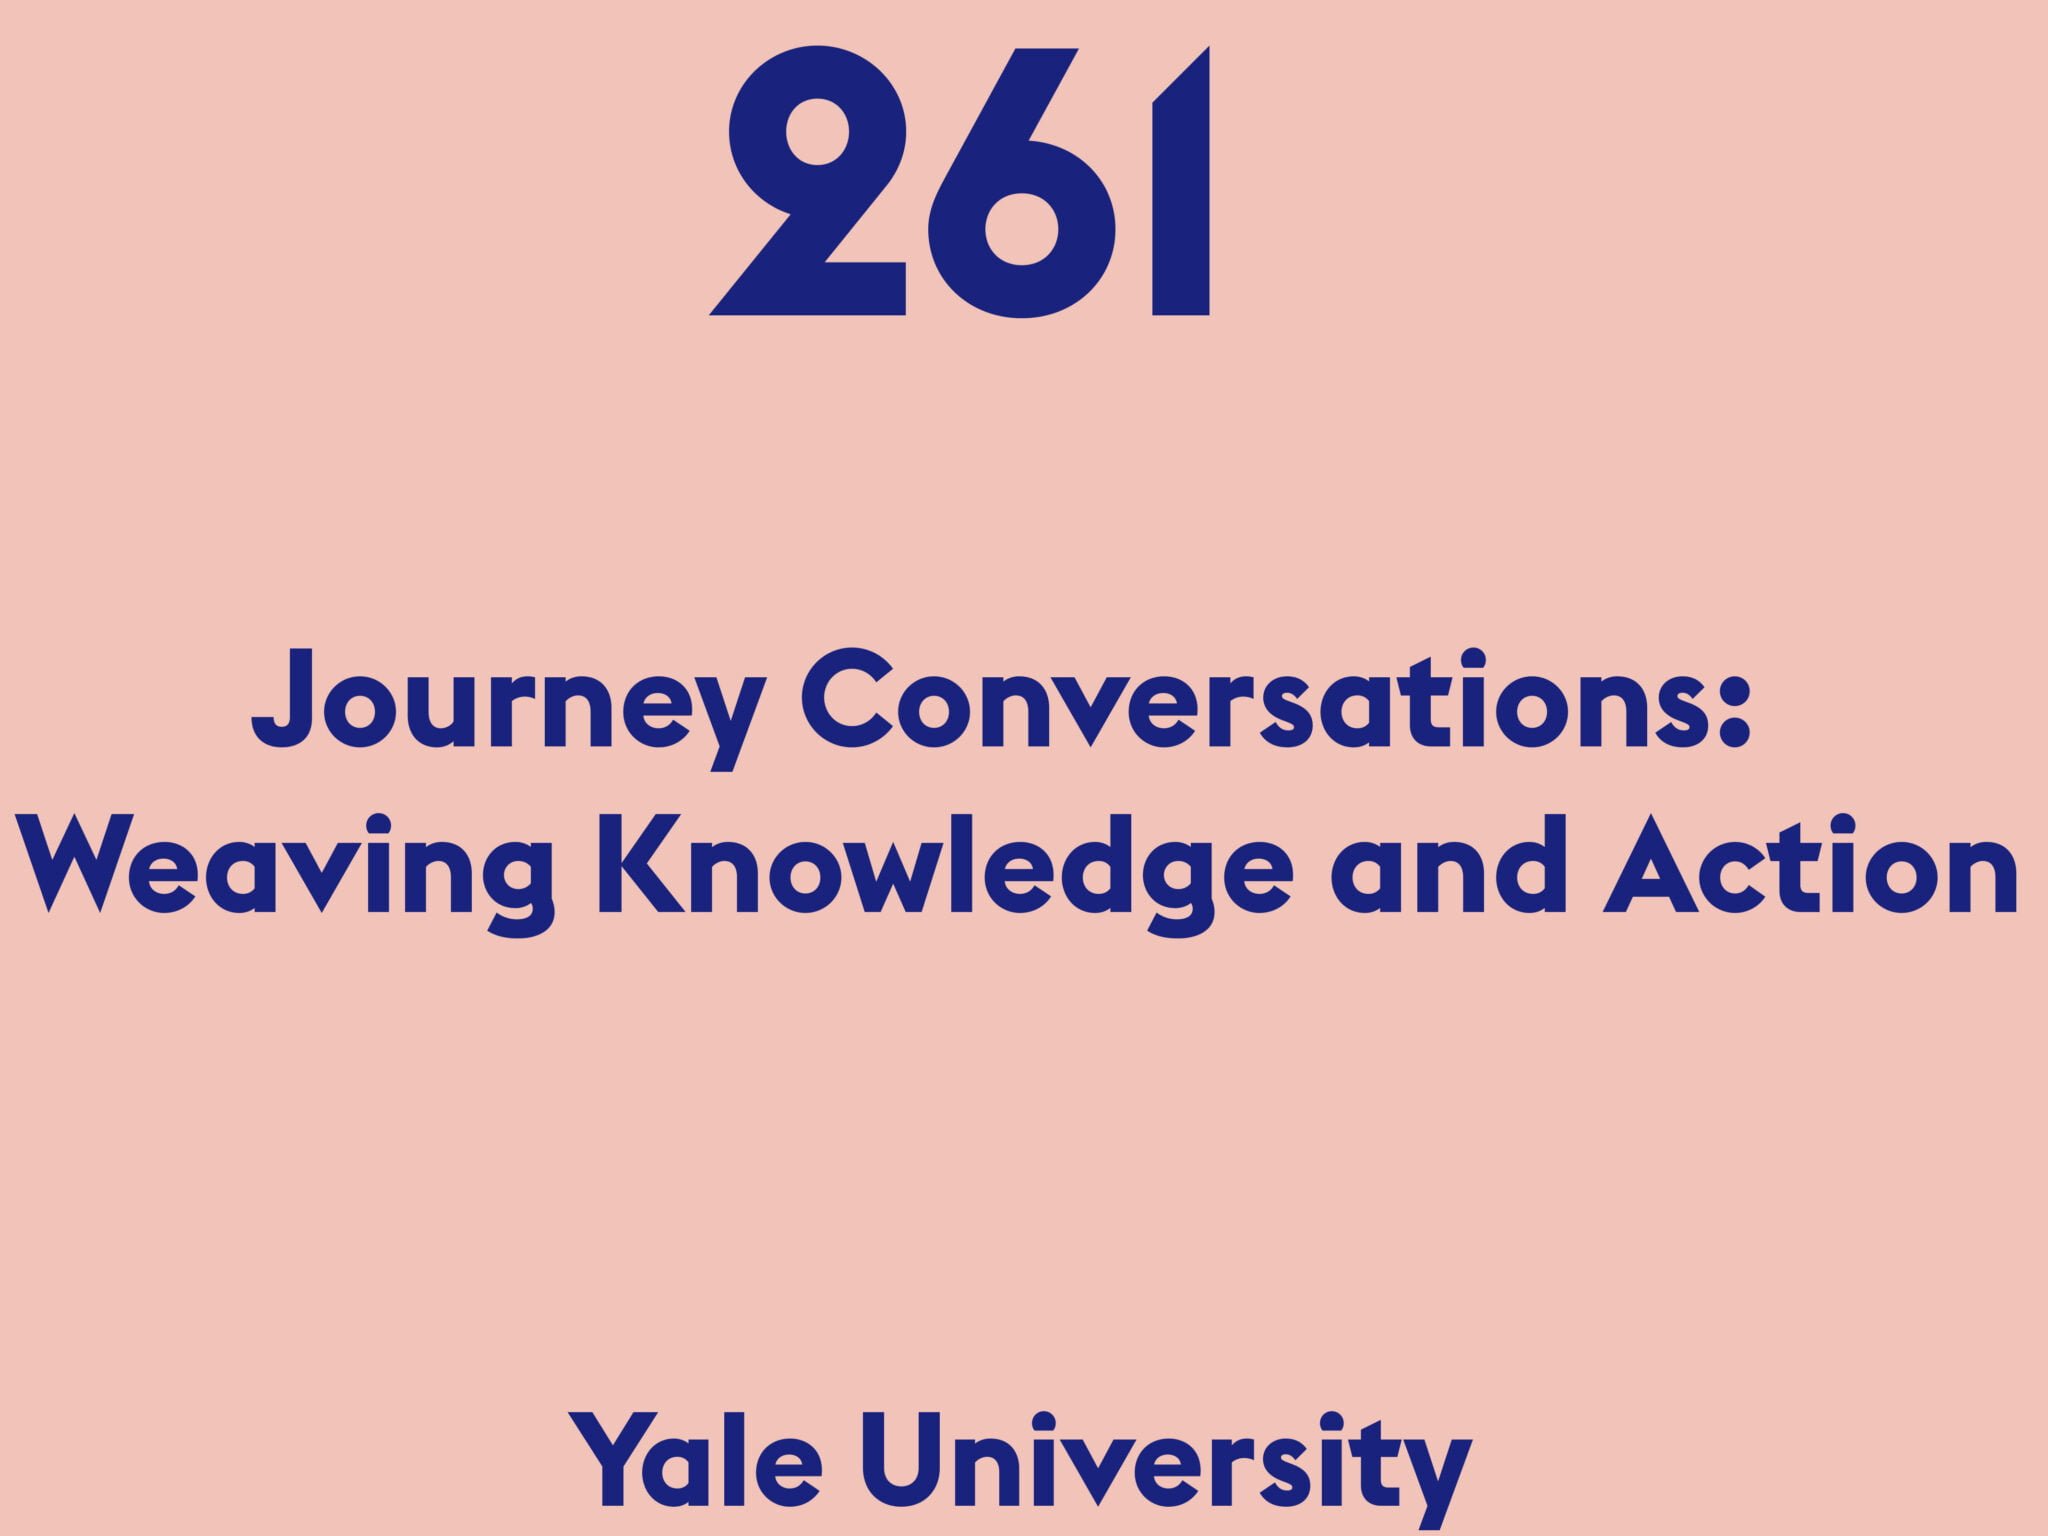 Journey Conversations: Weaving Knowledge and Action